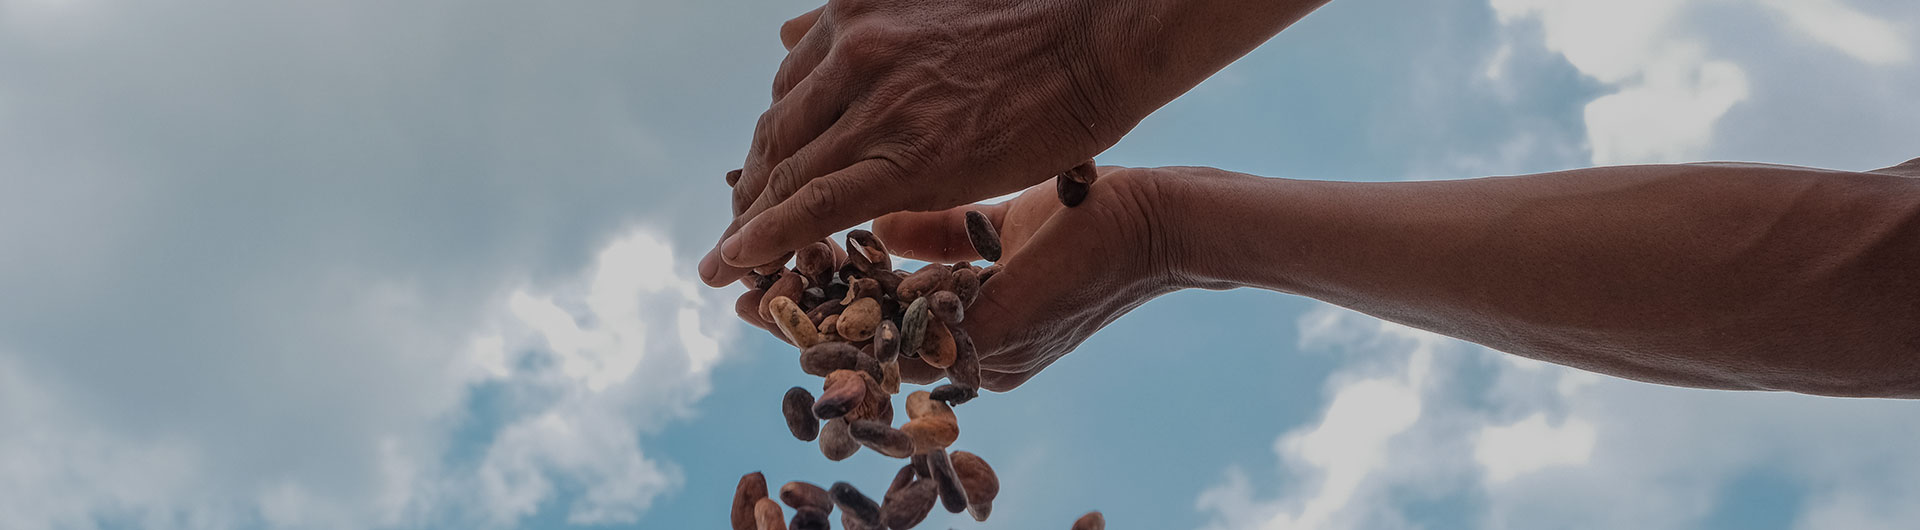 Cocoa beans pouring from hands, set against a blue sky (Photo)